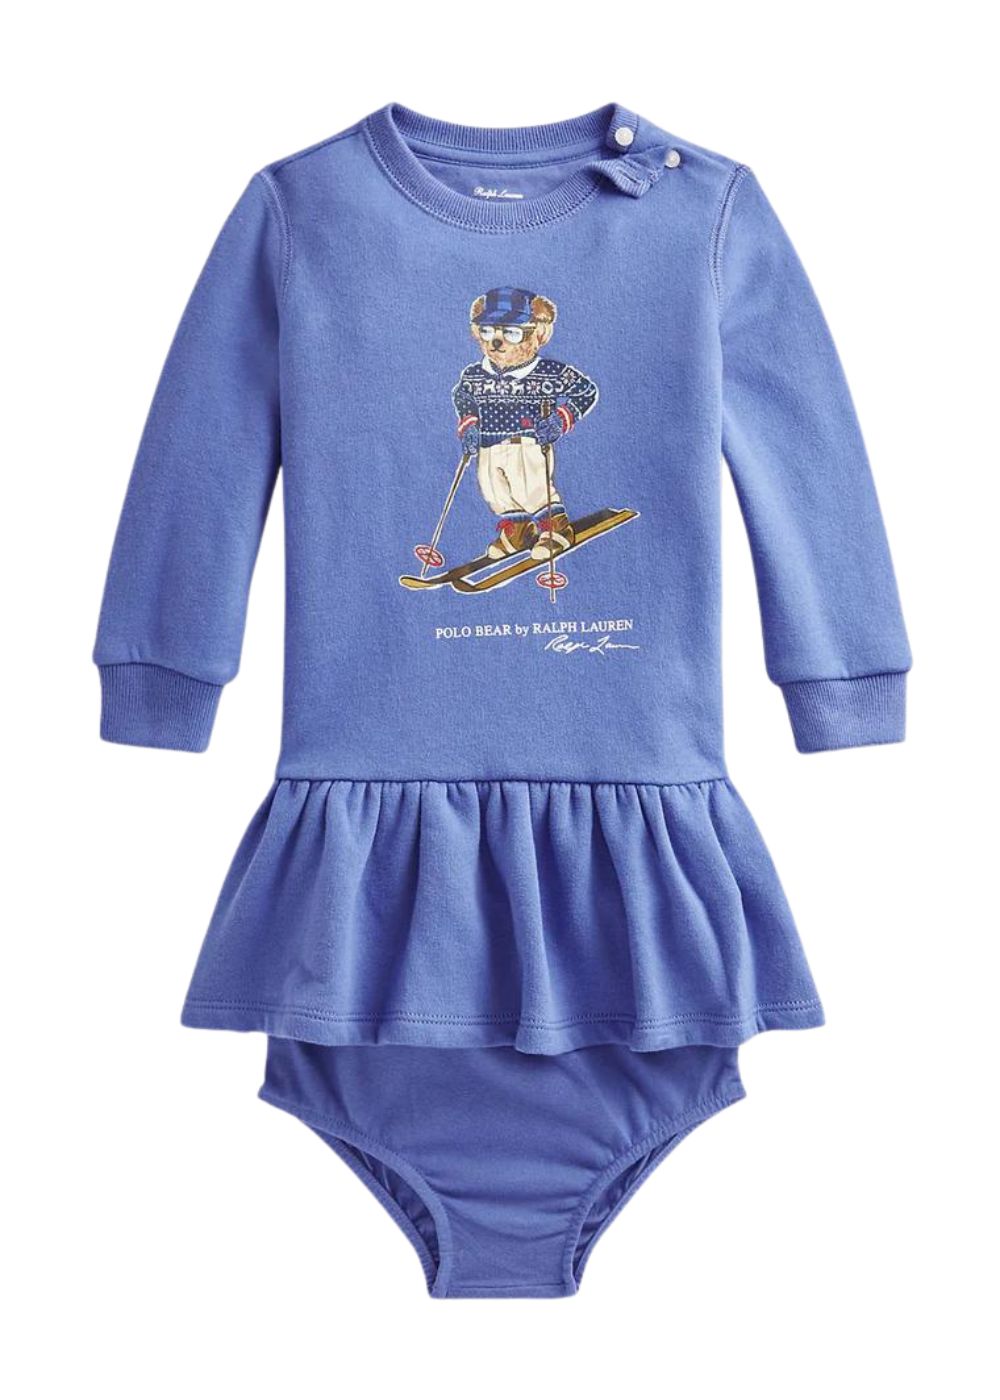 Featured image for “Polo Ralph Lauren abito Polo bear”